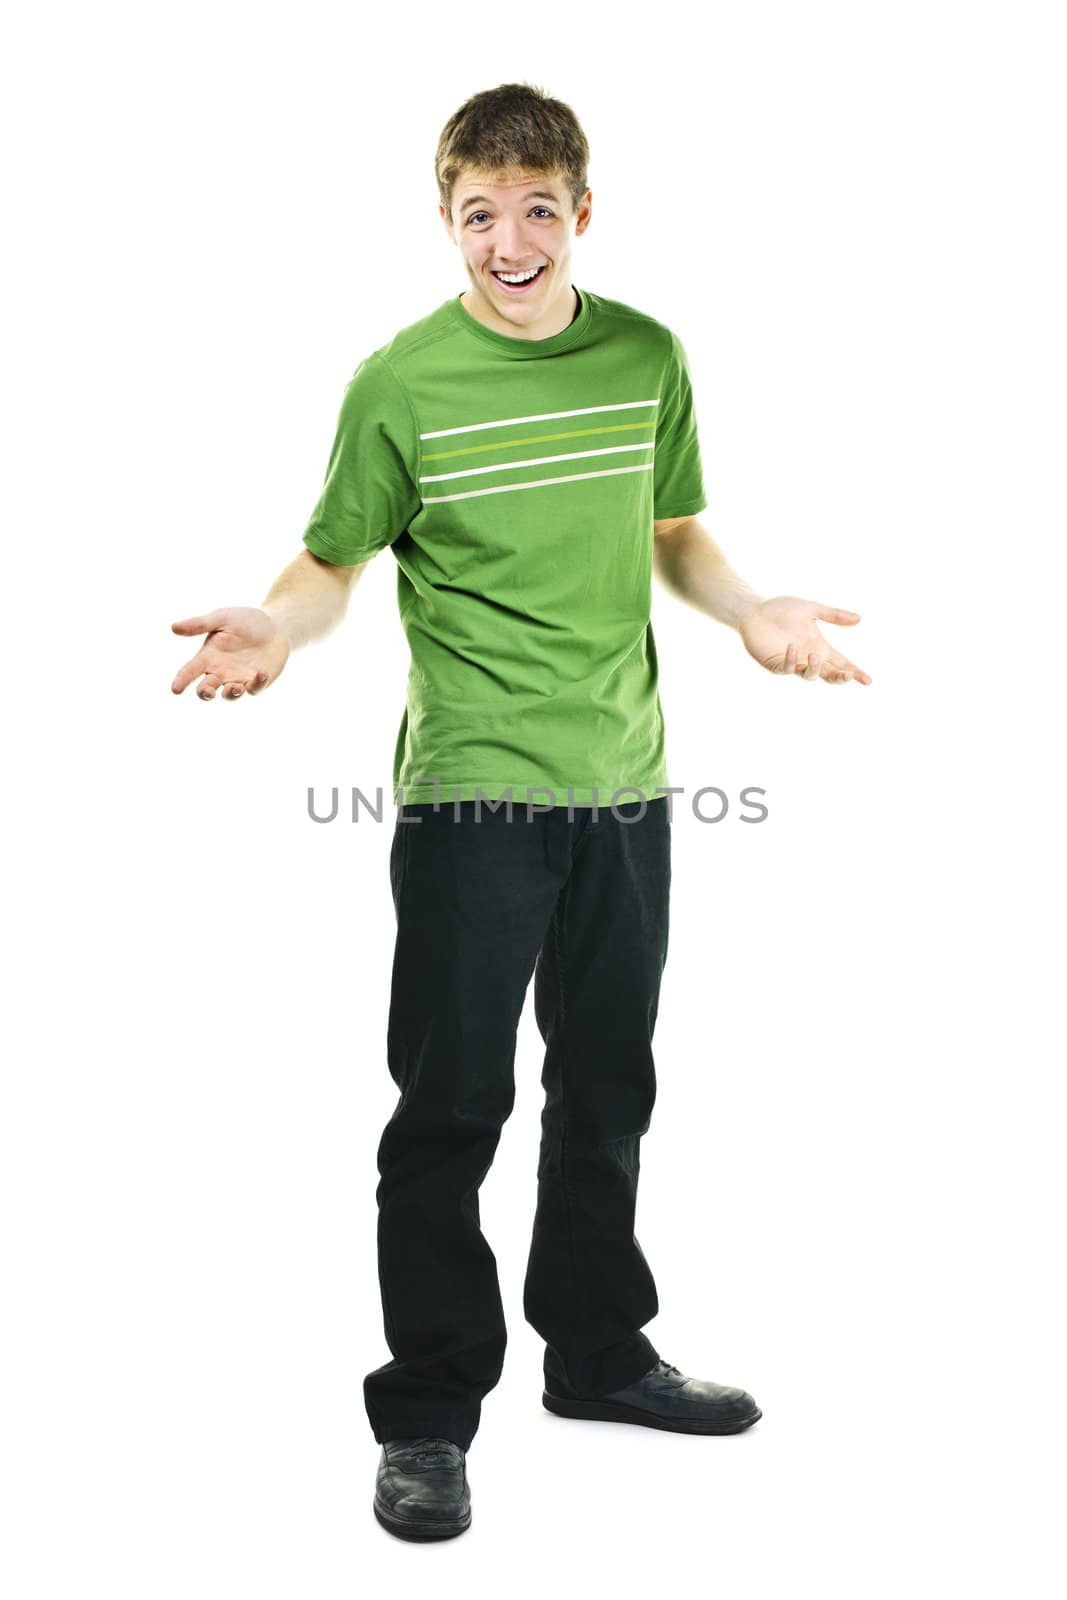 Shrugging smiling young man standing isolated on white background